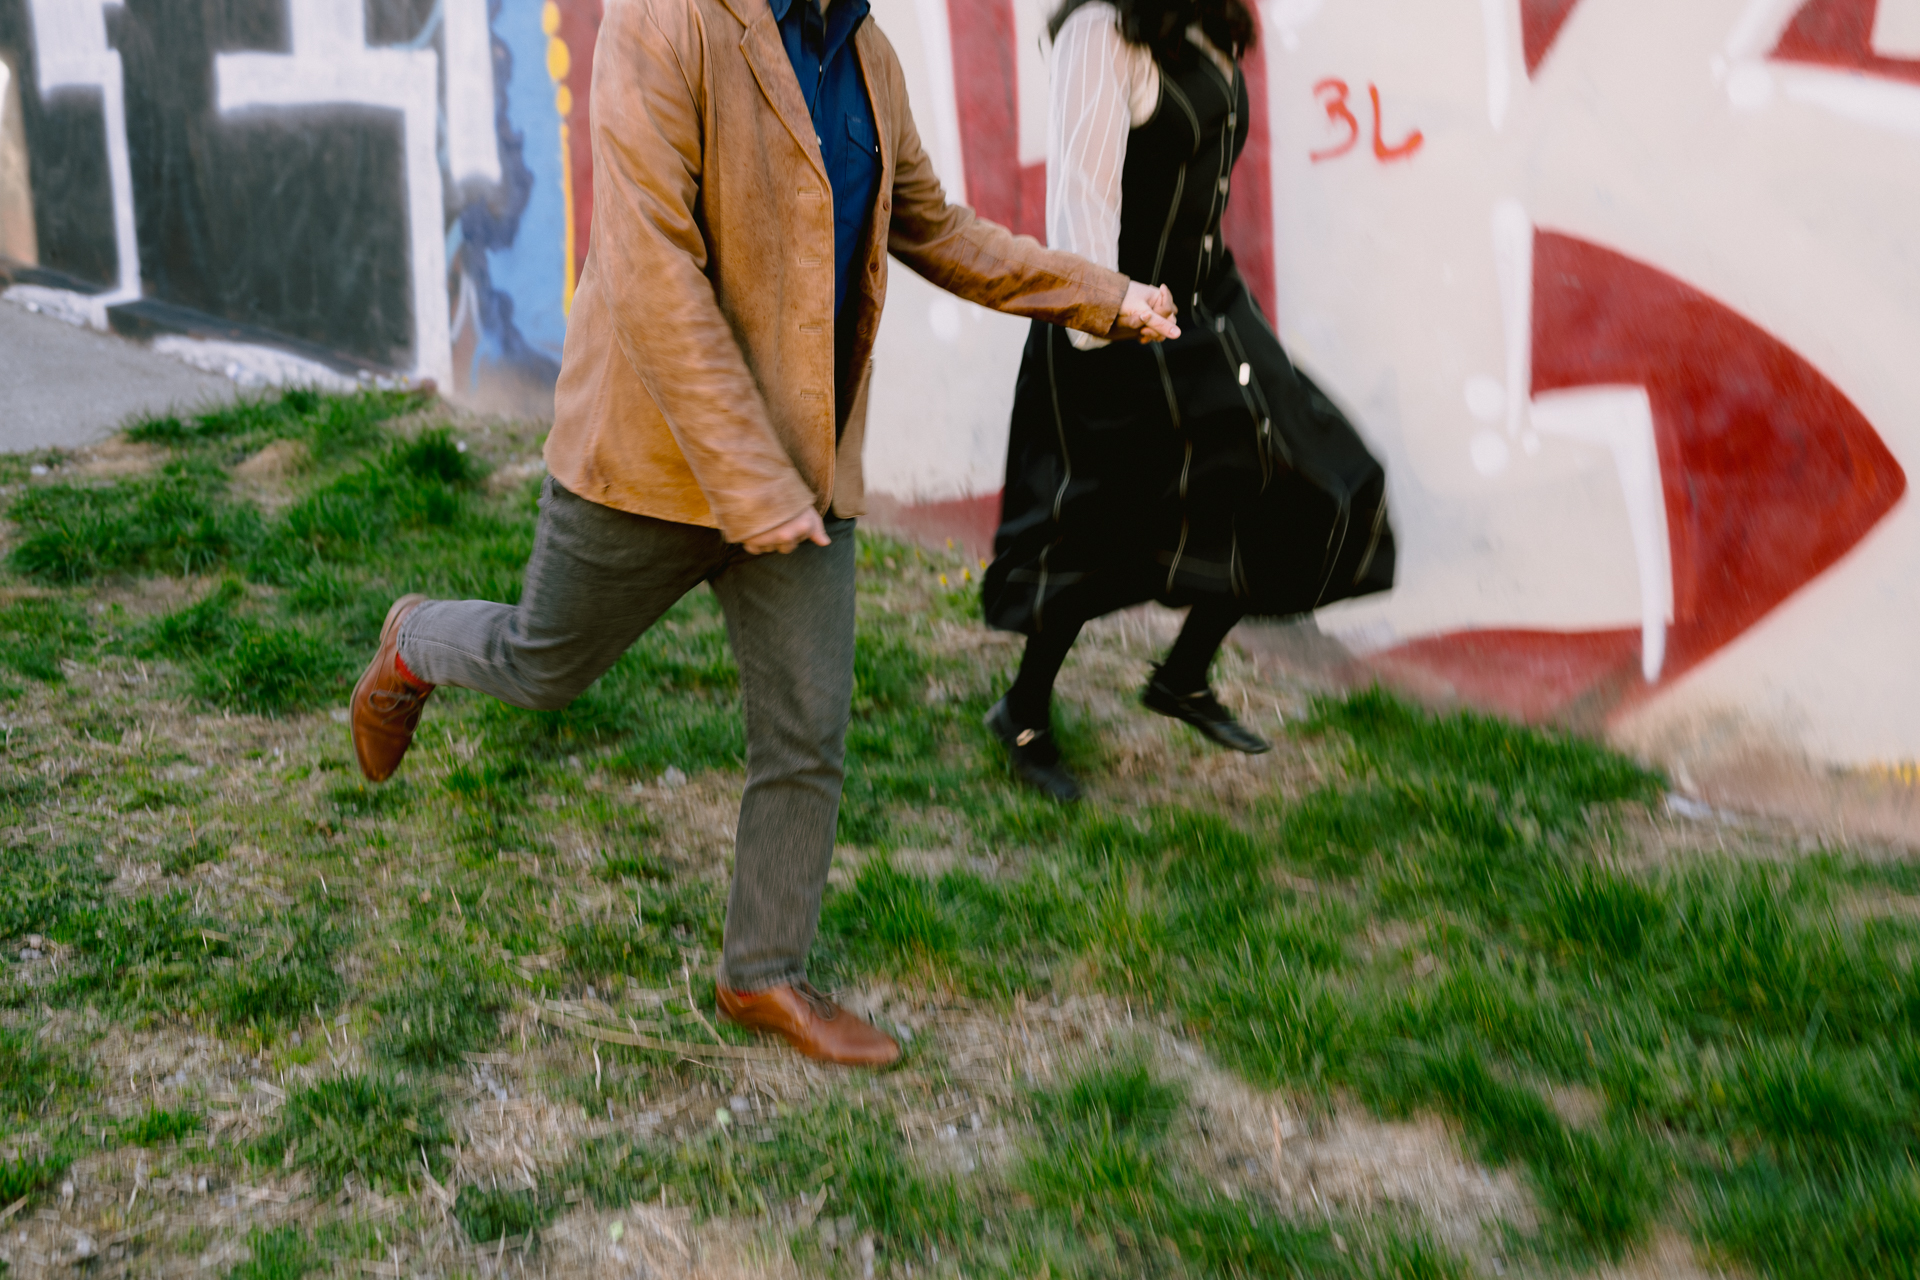 Couple run and play around in front of an artistic mural for engagement photographer Toronto to capture their candid moment.